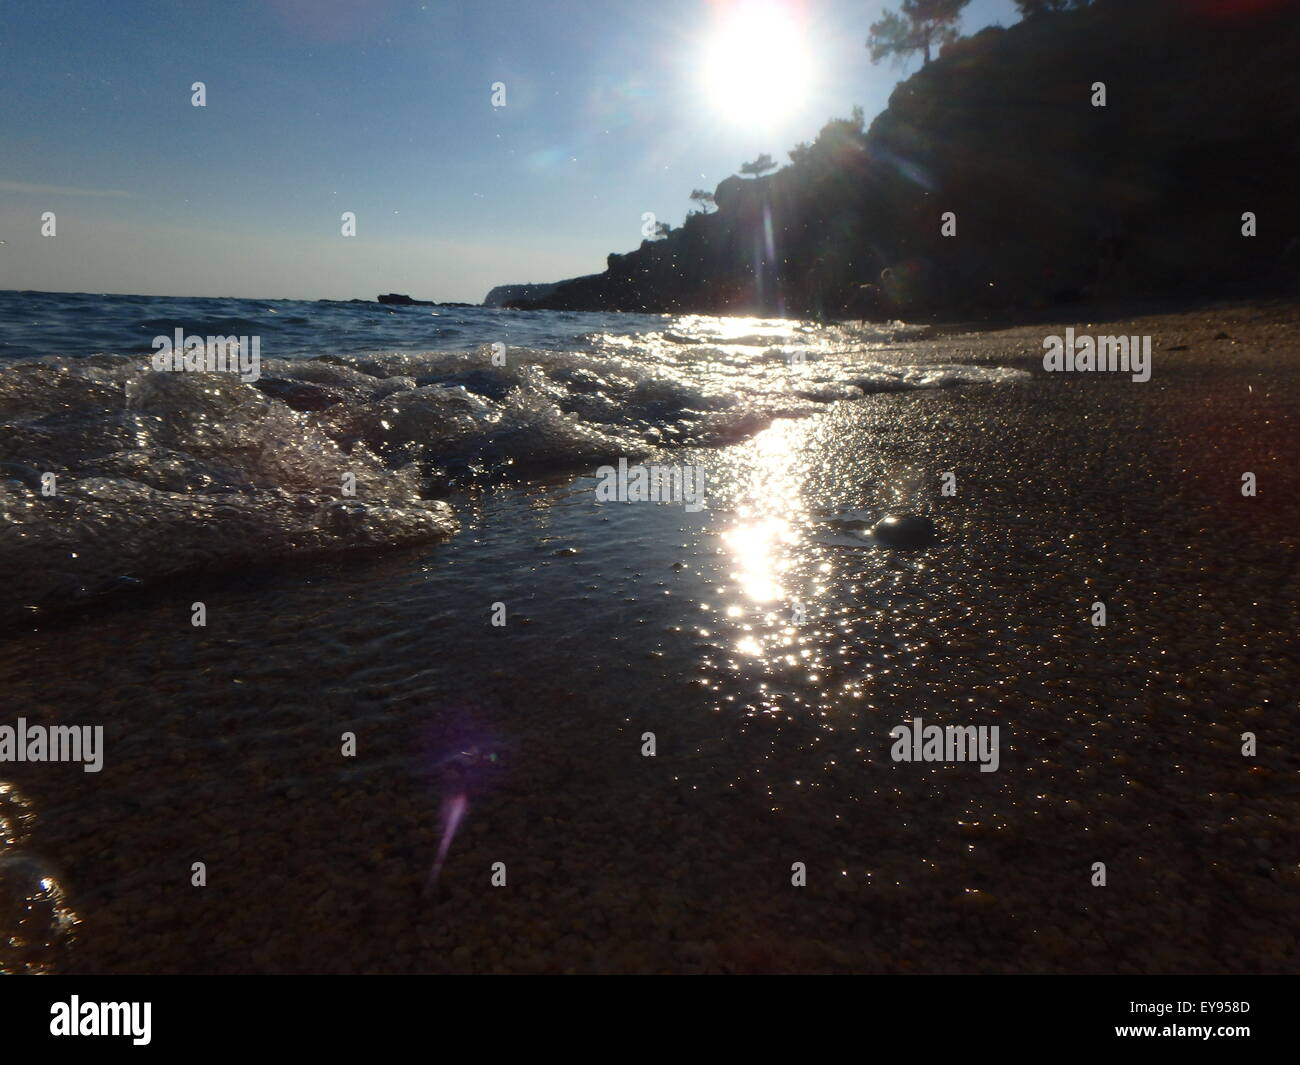 Small waves splashing in shallow waters at sunset. Stock Photo